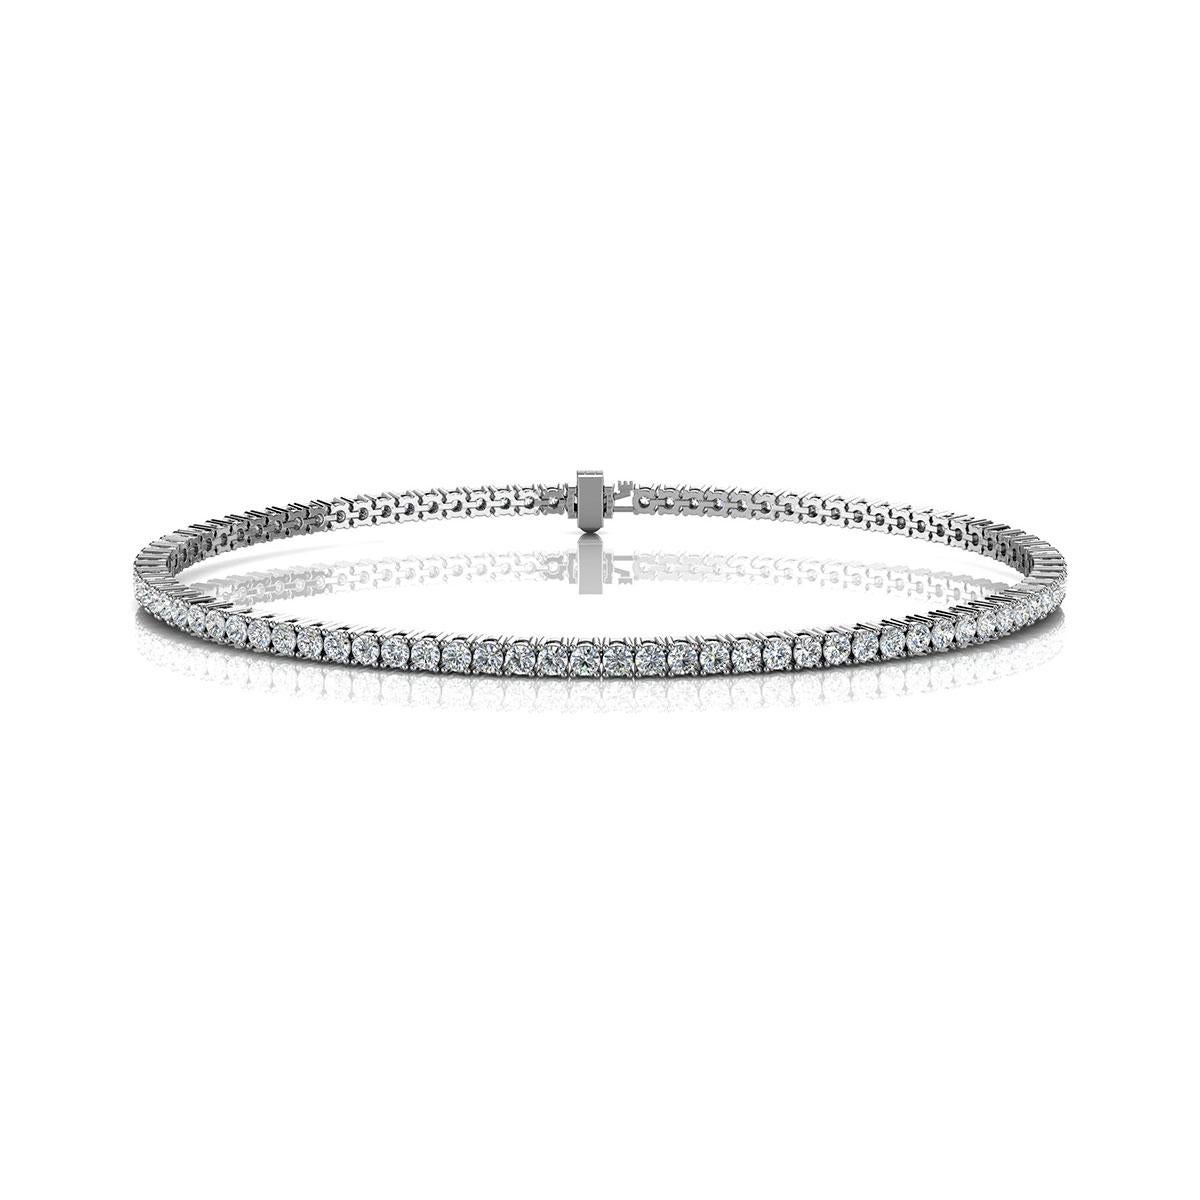 A timeless four prongs diamonds tennis bracelet. Experience the Difference!

Product details: 

Center Gemstone Type: NATURAL DIAMOND
Center Gemstone Color: WHITE
Center Gemstone Shape: ROUND
Center Diamond Carat Weight: 2
Metal: 14K White